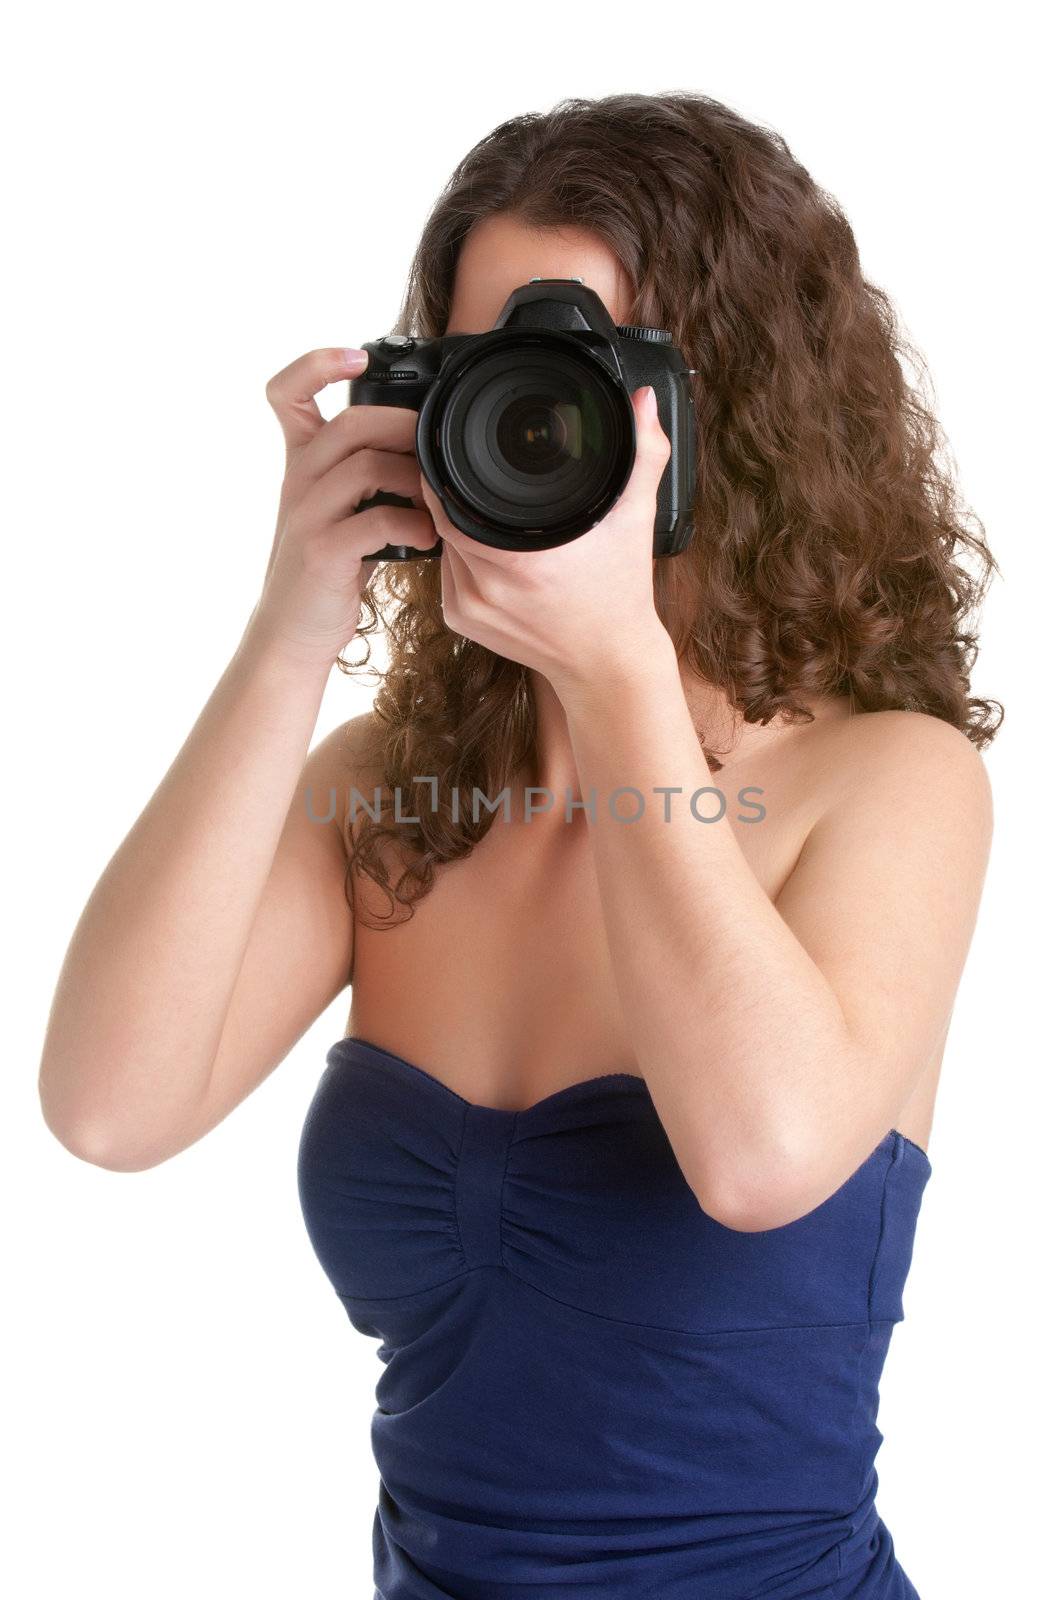 Woman holding an SLR camera, getting ready to take a picture, isolated in white